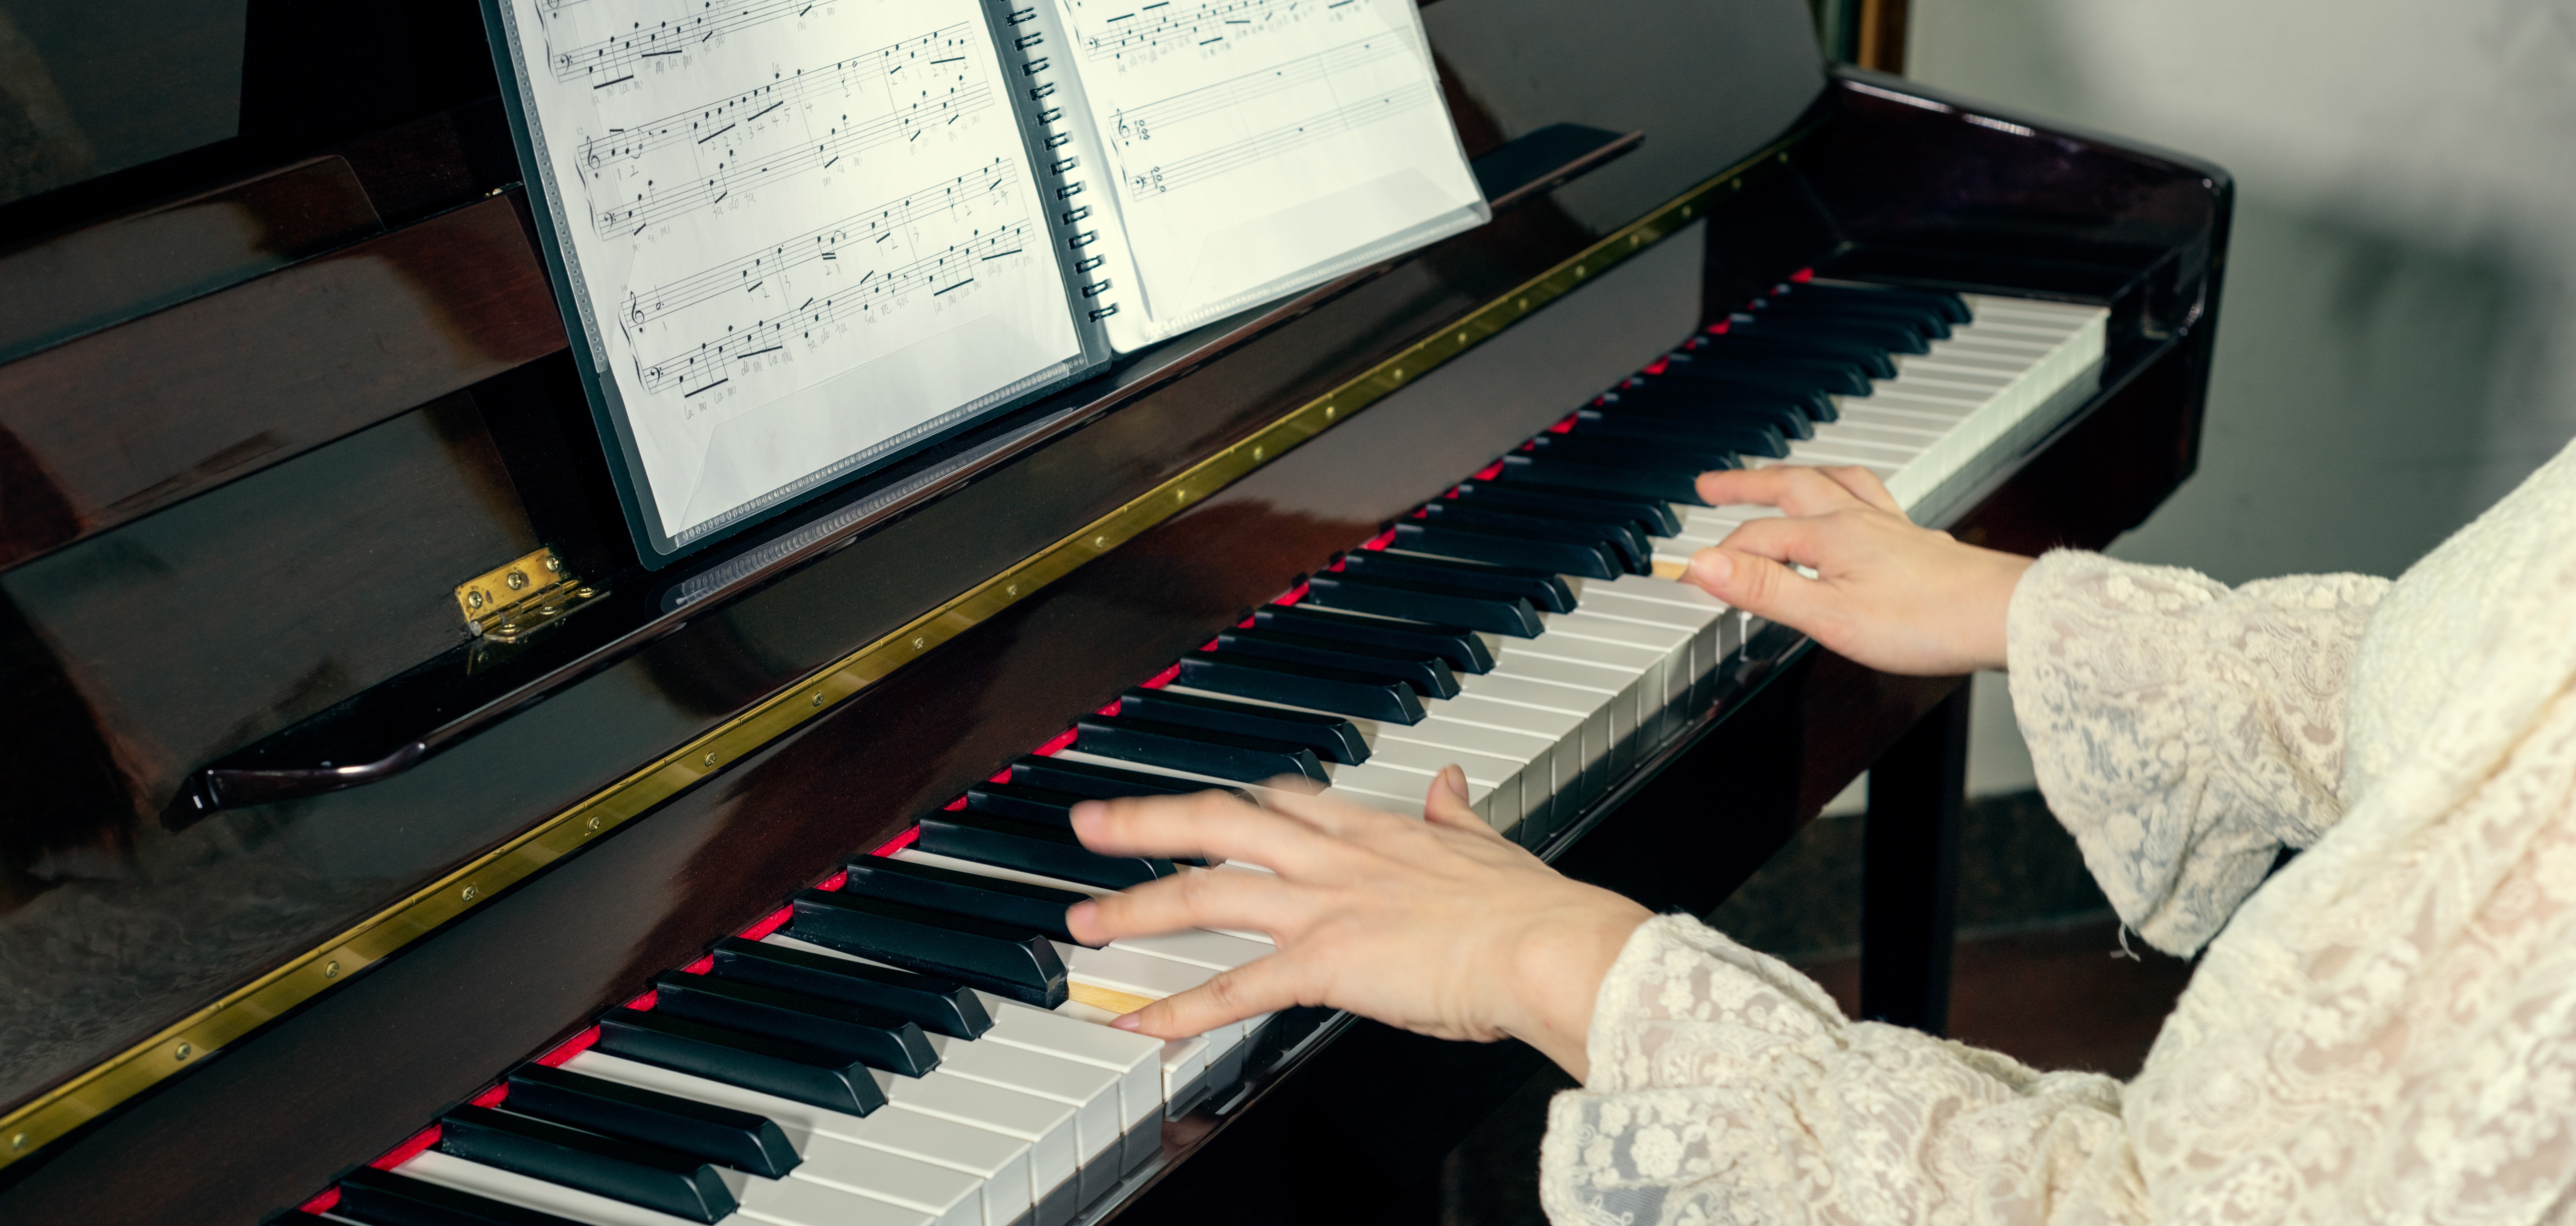 Adult Piano and Guitar Lessons: It's Never Too Late To Learn! - 88 Keys Music Academy